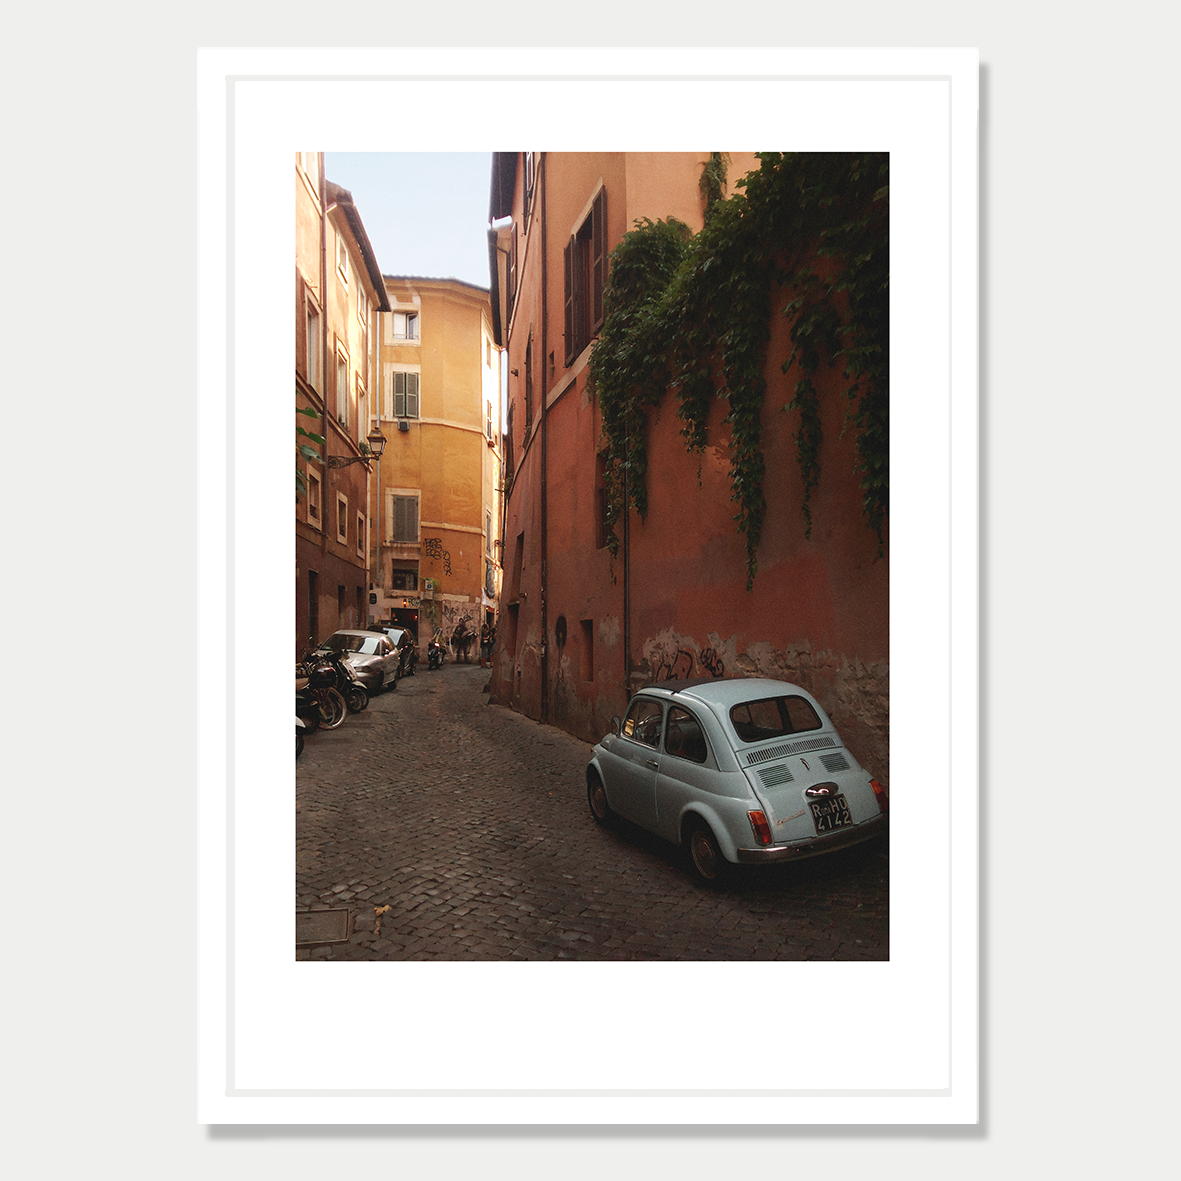 Little Car in a Backstreet of Trastavere, Rome Still Life Photographic Art Print in a Skinny White Frame